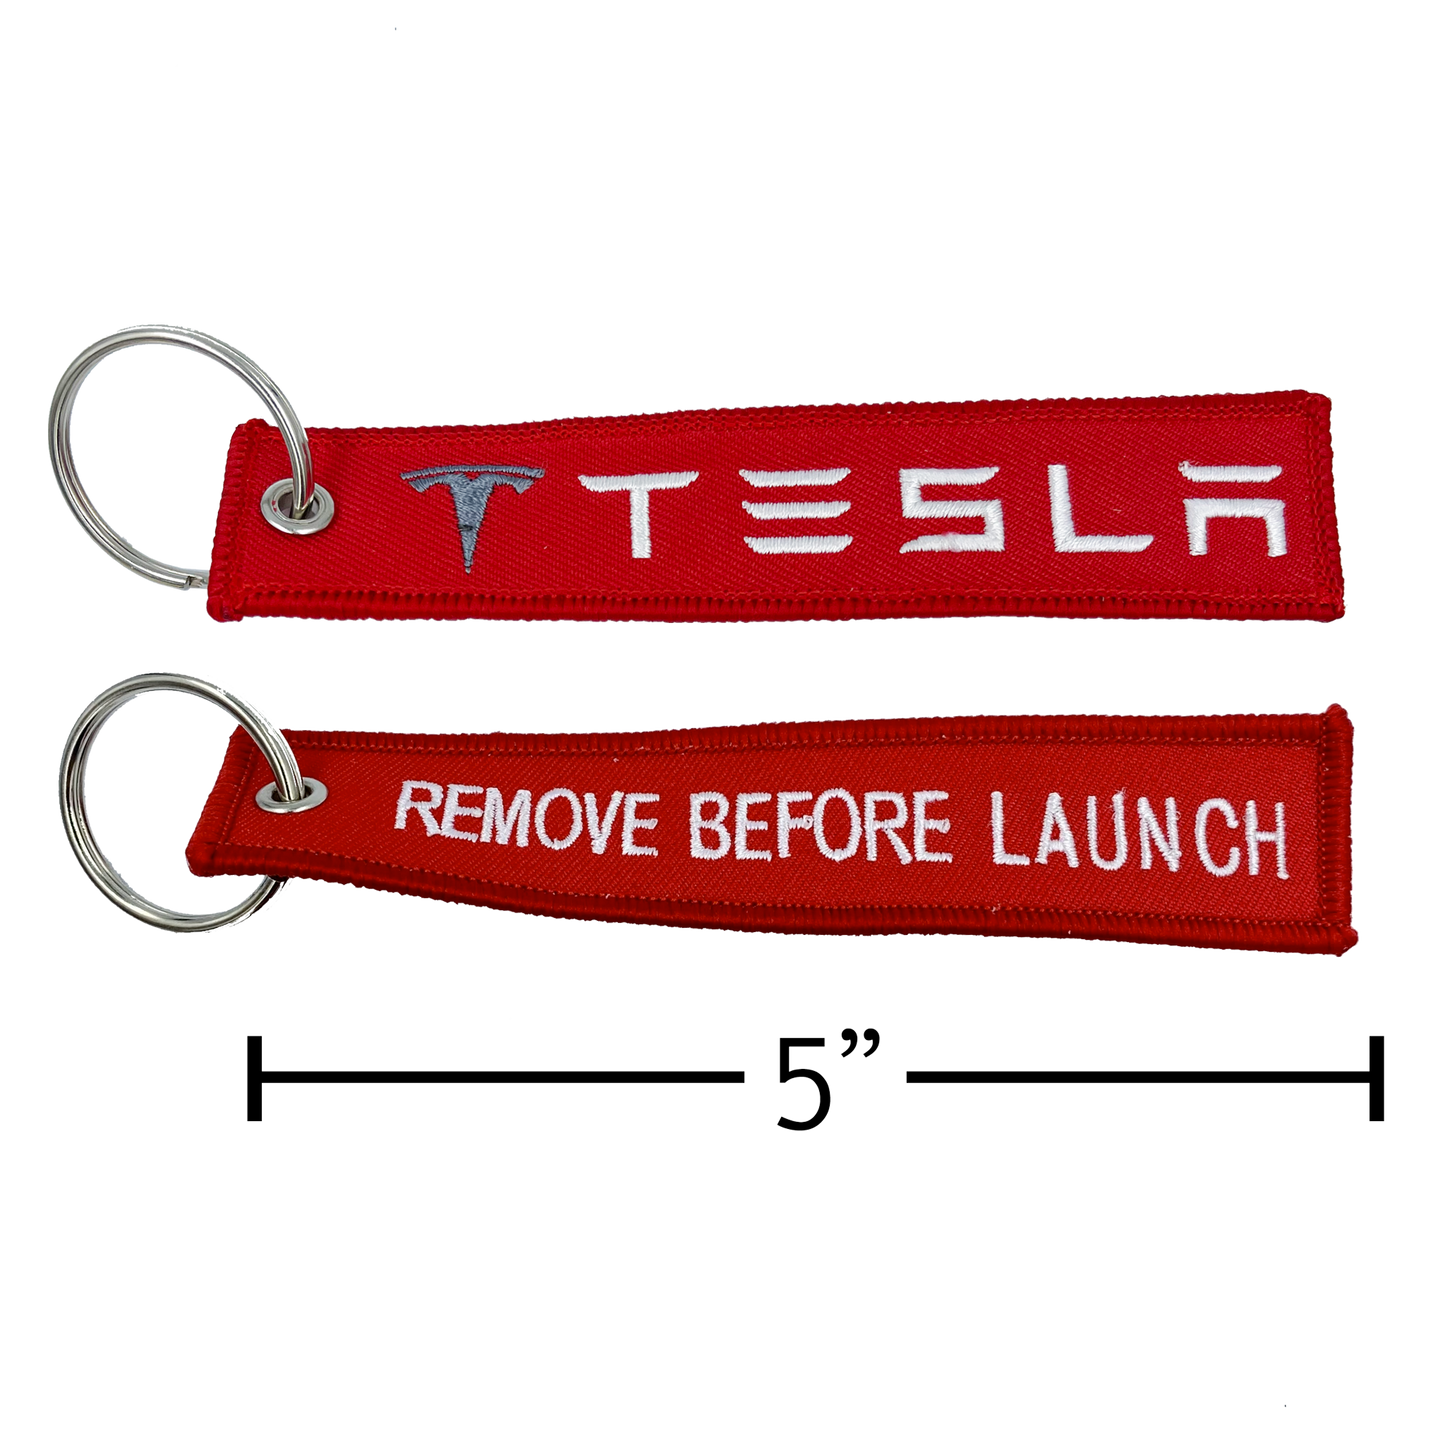 EL6-020 Tesla 3 X S Y REMOVE BEFORE LAUNCH Keychain or Luggage Tag or red zipper pull SpaceX